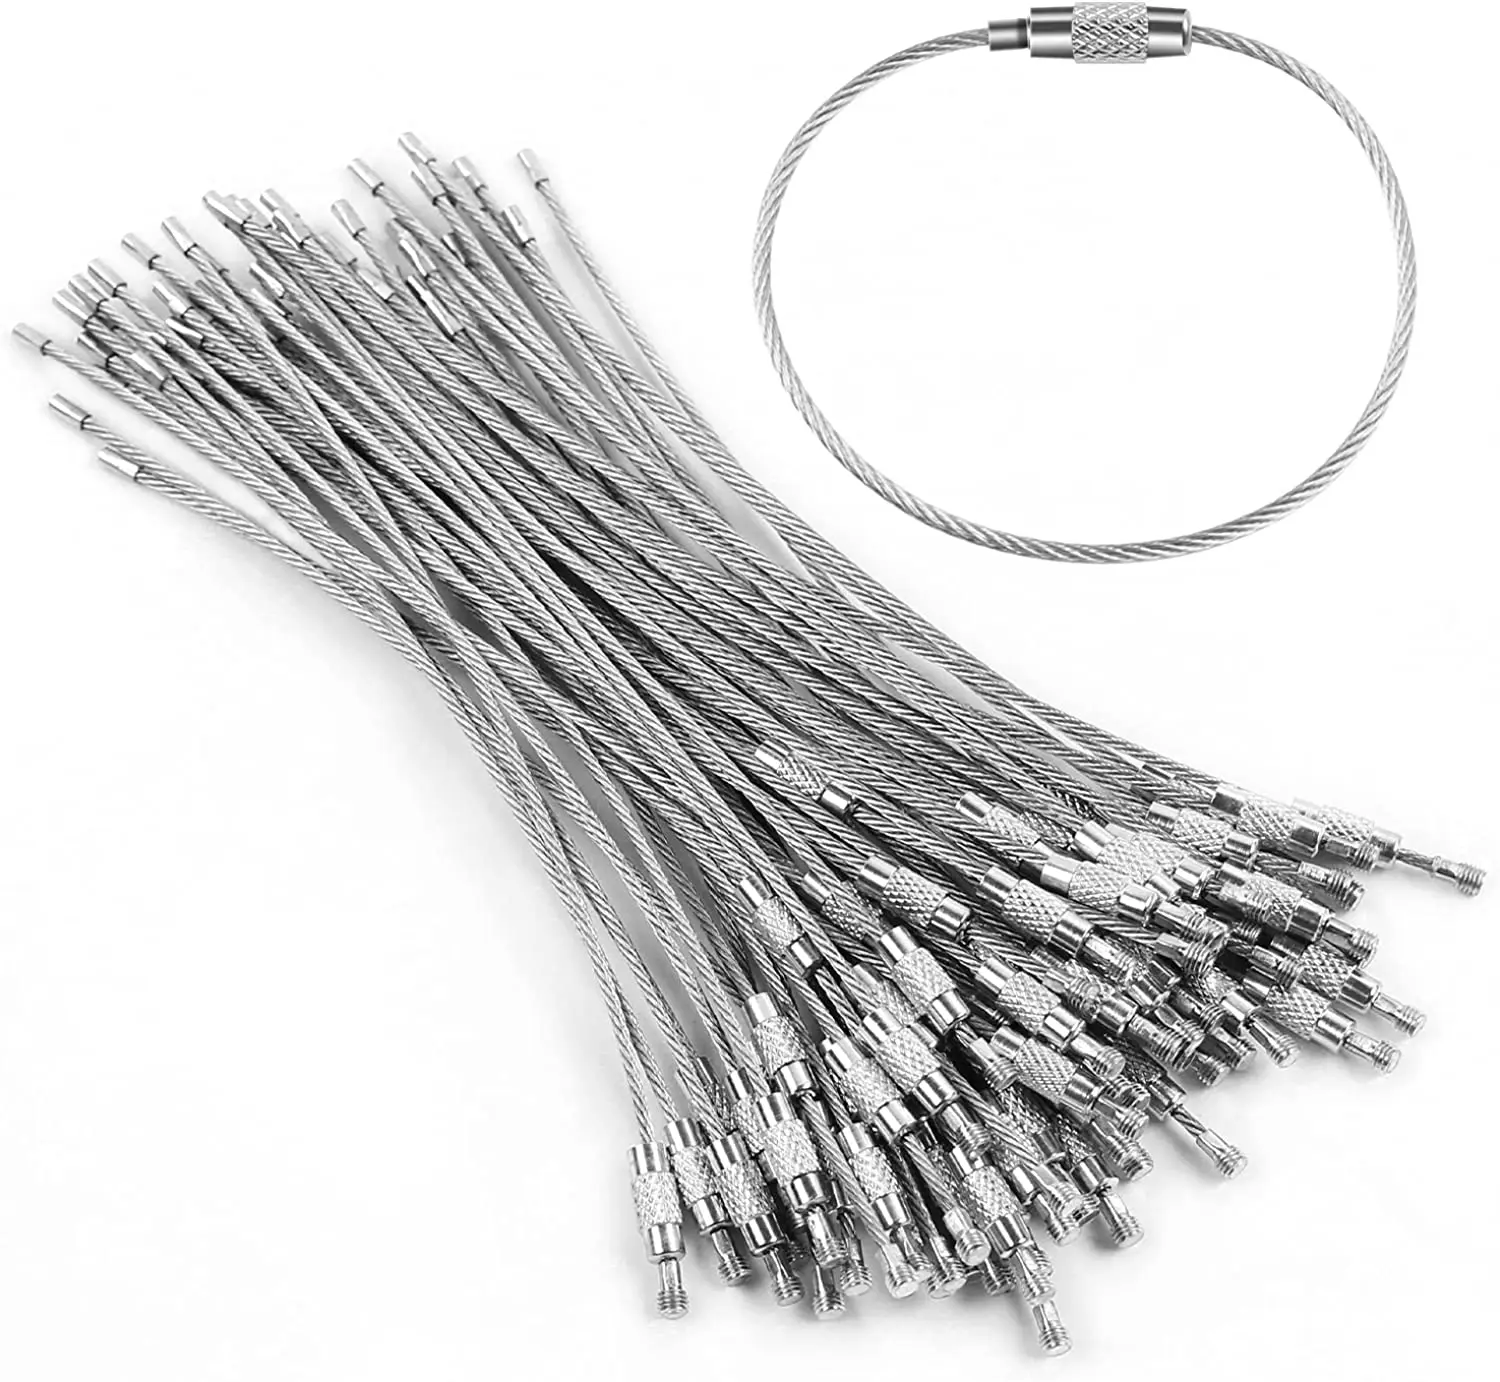 10Pcs/Piece Key Ring Stainless Steel Label Rope EDC Wire Cable Circl Lock  With Spin Strong Load-Bearing Capacity Multifunctional